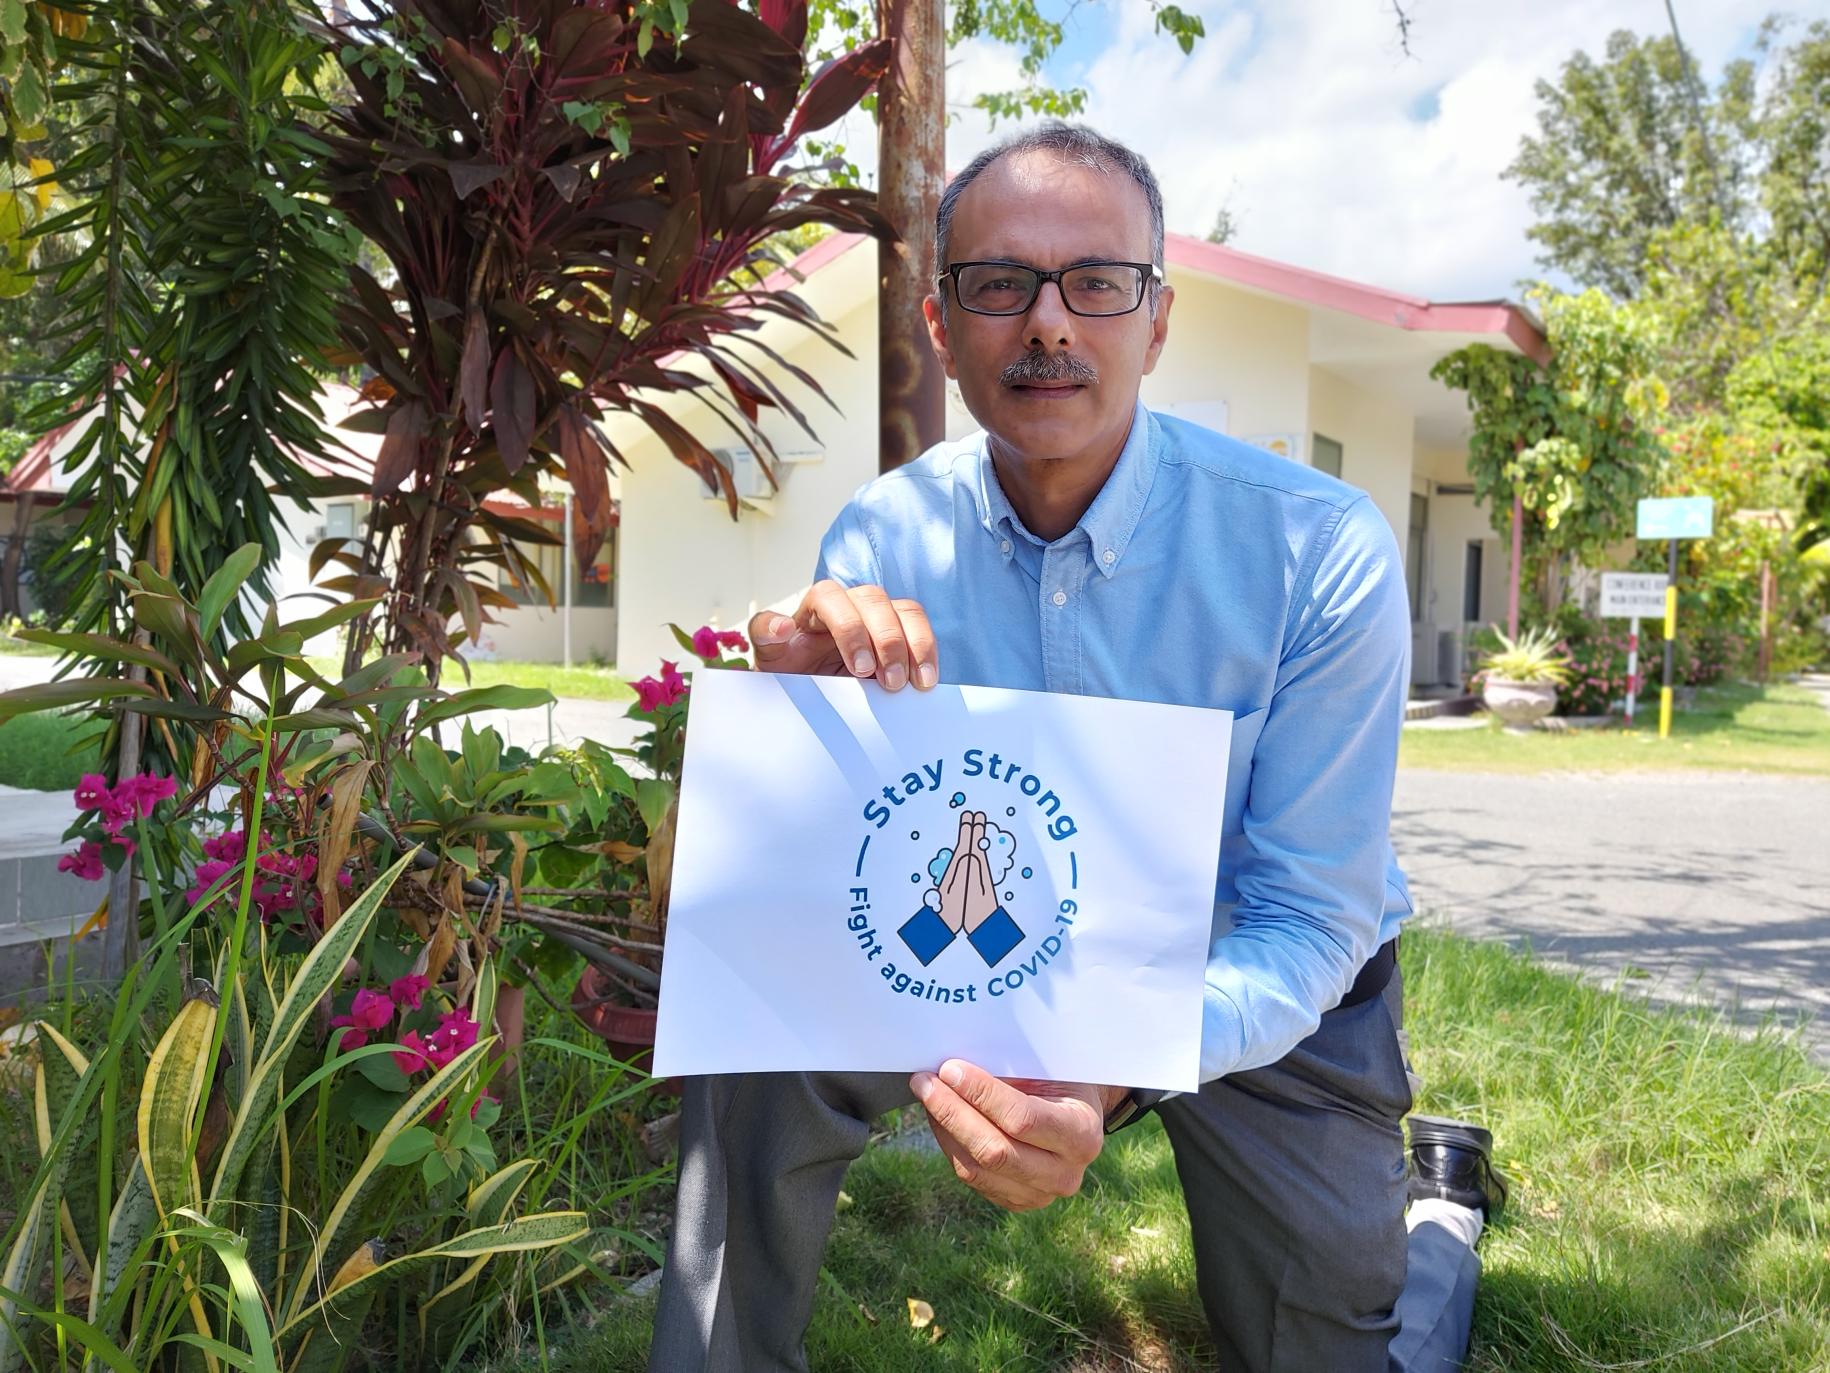 Outgoing Resident Coordinator of Timor-Leste, Roy Trivedy, knees with poster to encourage hand washing during COIVD-19 